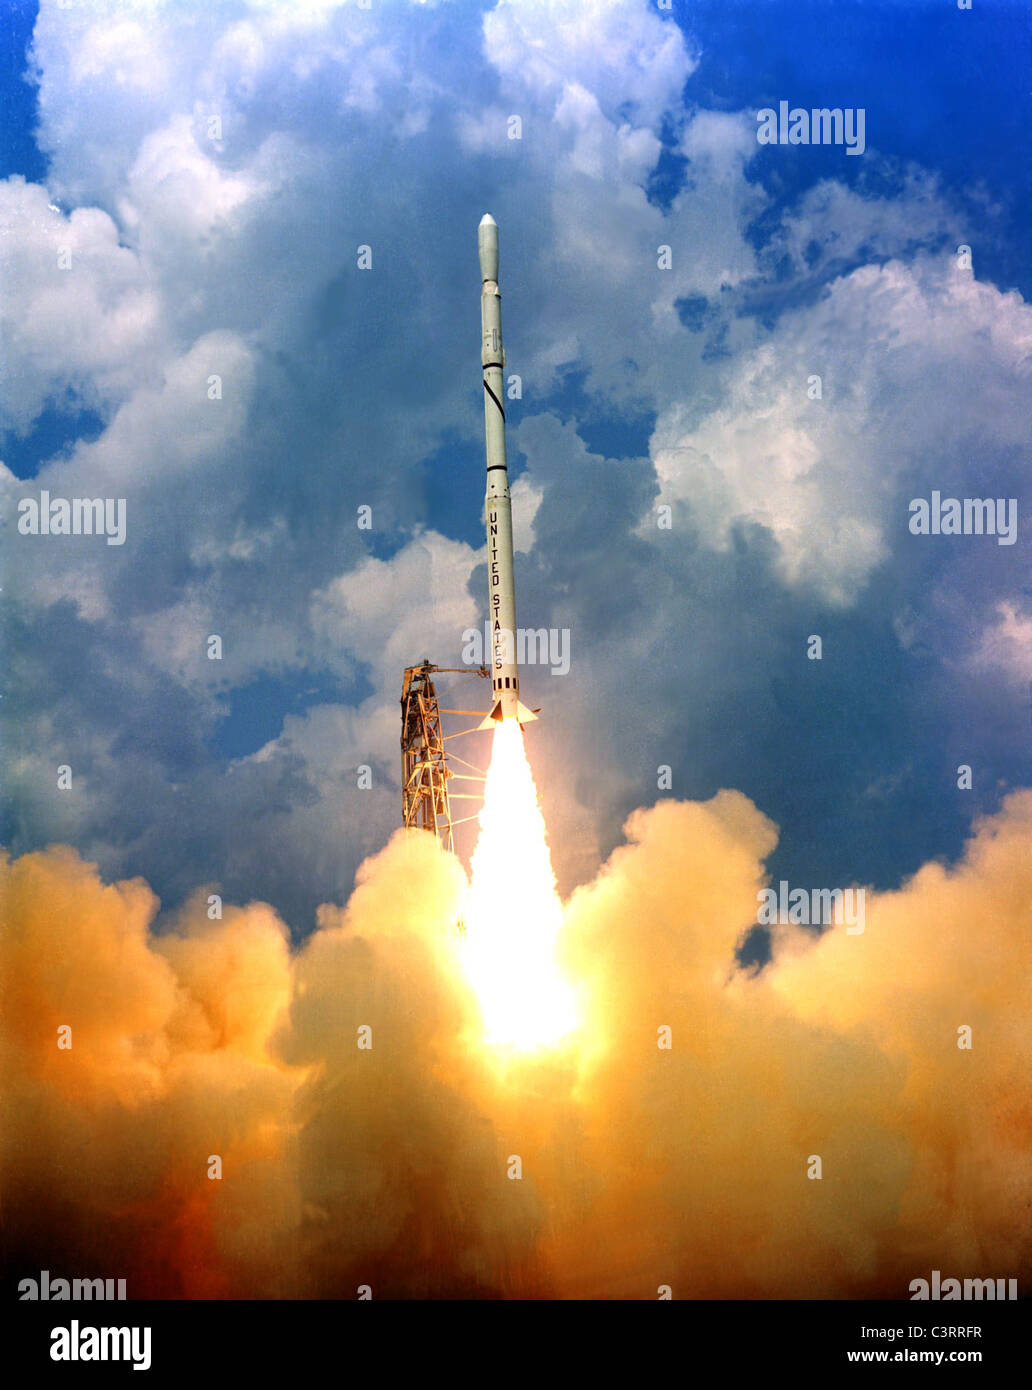 The Scout launch vehicle lifts off Stock Photo